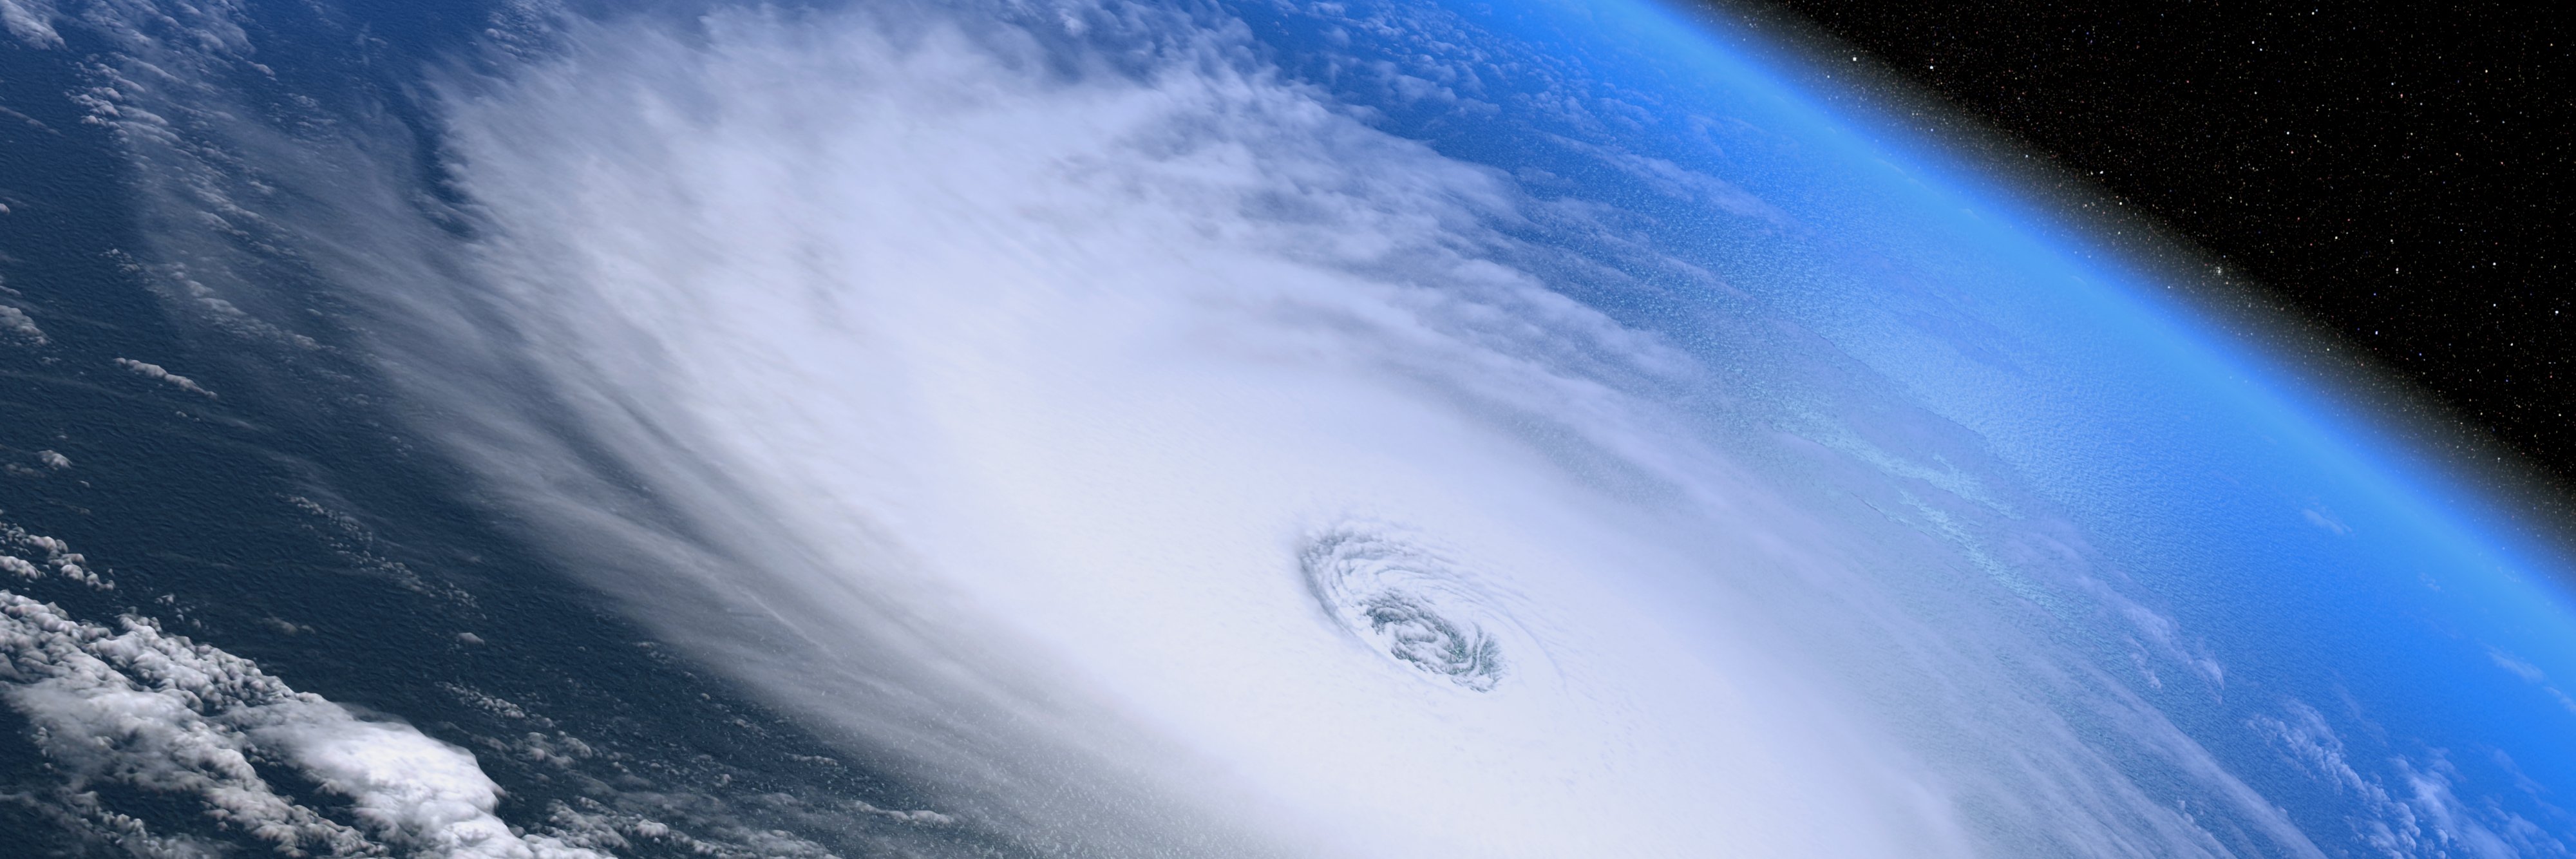 Hurricanes, typhoons and cyclones